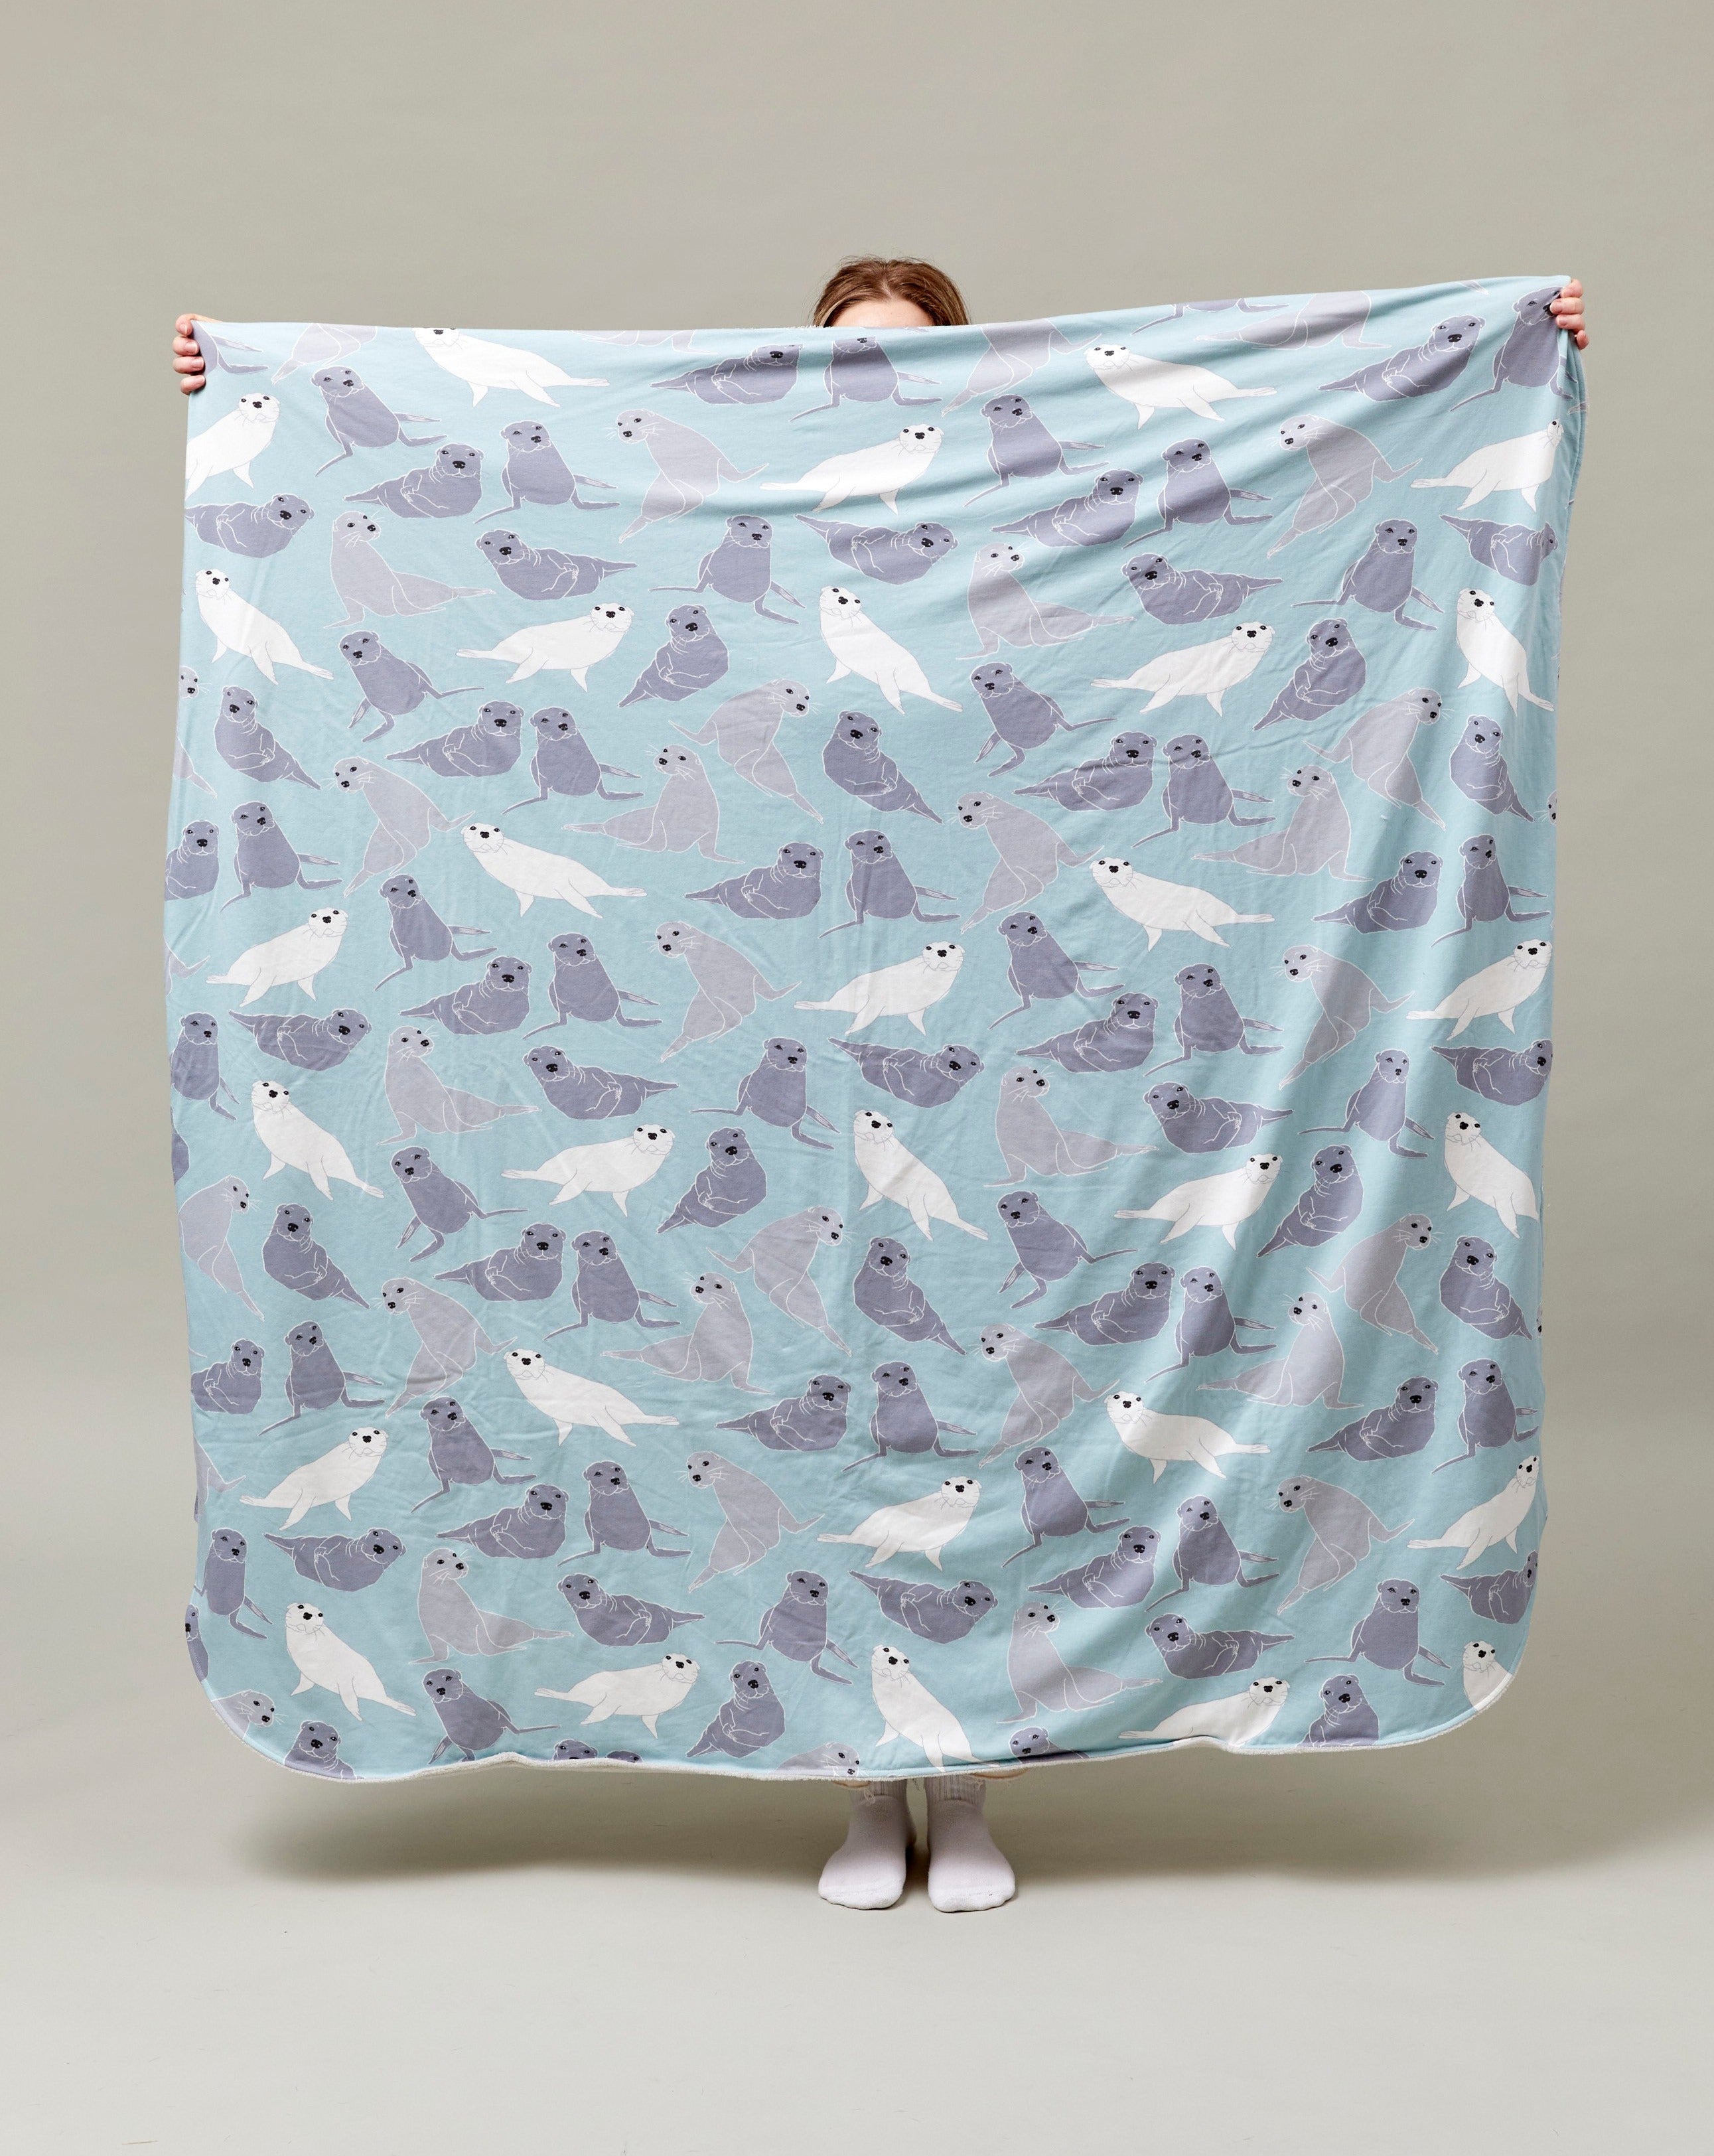 Sealy Staffies Dog Blanket